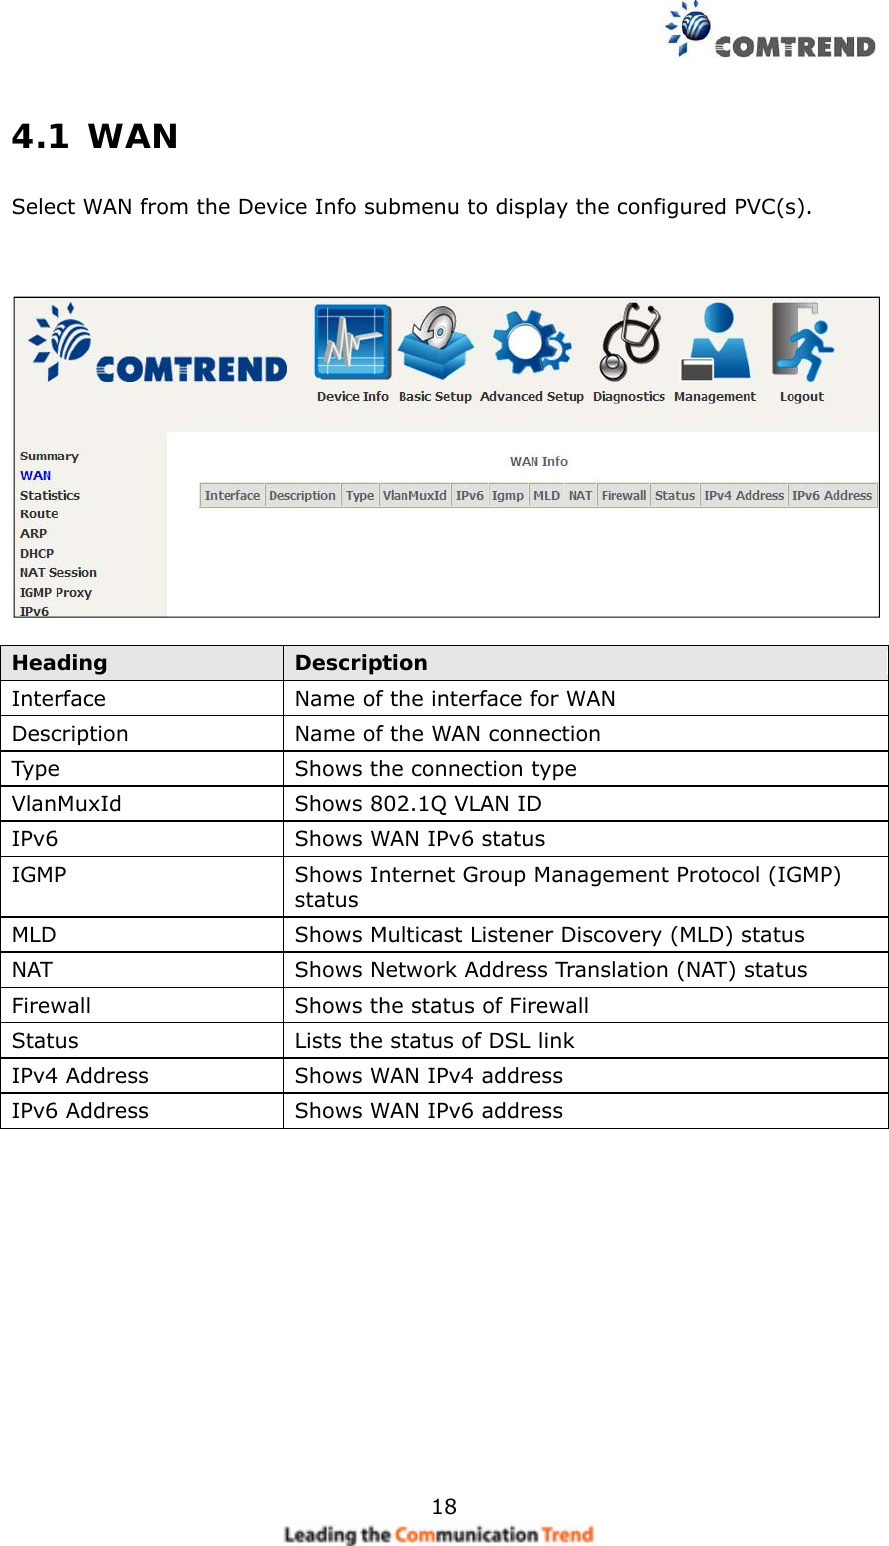    184.1 WAN Select WAN from the Device Info submenu to display the configured PVC(s).      Heading  Description Interface   Name of the interface for WAN Description  Name of the WAN connection Type  Shows the connection type   VlanMuxId  Shows 802.1Q VLAN ID IPv6  Shows WAN IPv6 status IGMP  Shows Internet Group Management Protocol (IGMP) status MLD  Shows Multicast Listener Discovery (MLD) status NAT  Shows Network Address Translation (NAT) status Firewall  Shows the status of Firewall Status  Lists the status of DSL link IPv4 Address  Shows WAN IPv4 address IPv6 Address  Shows WAN IPv6 address   